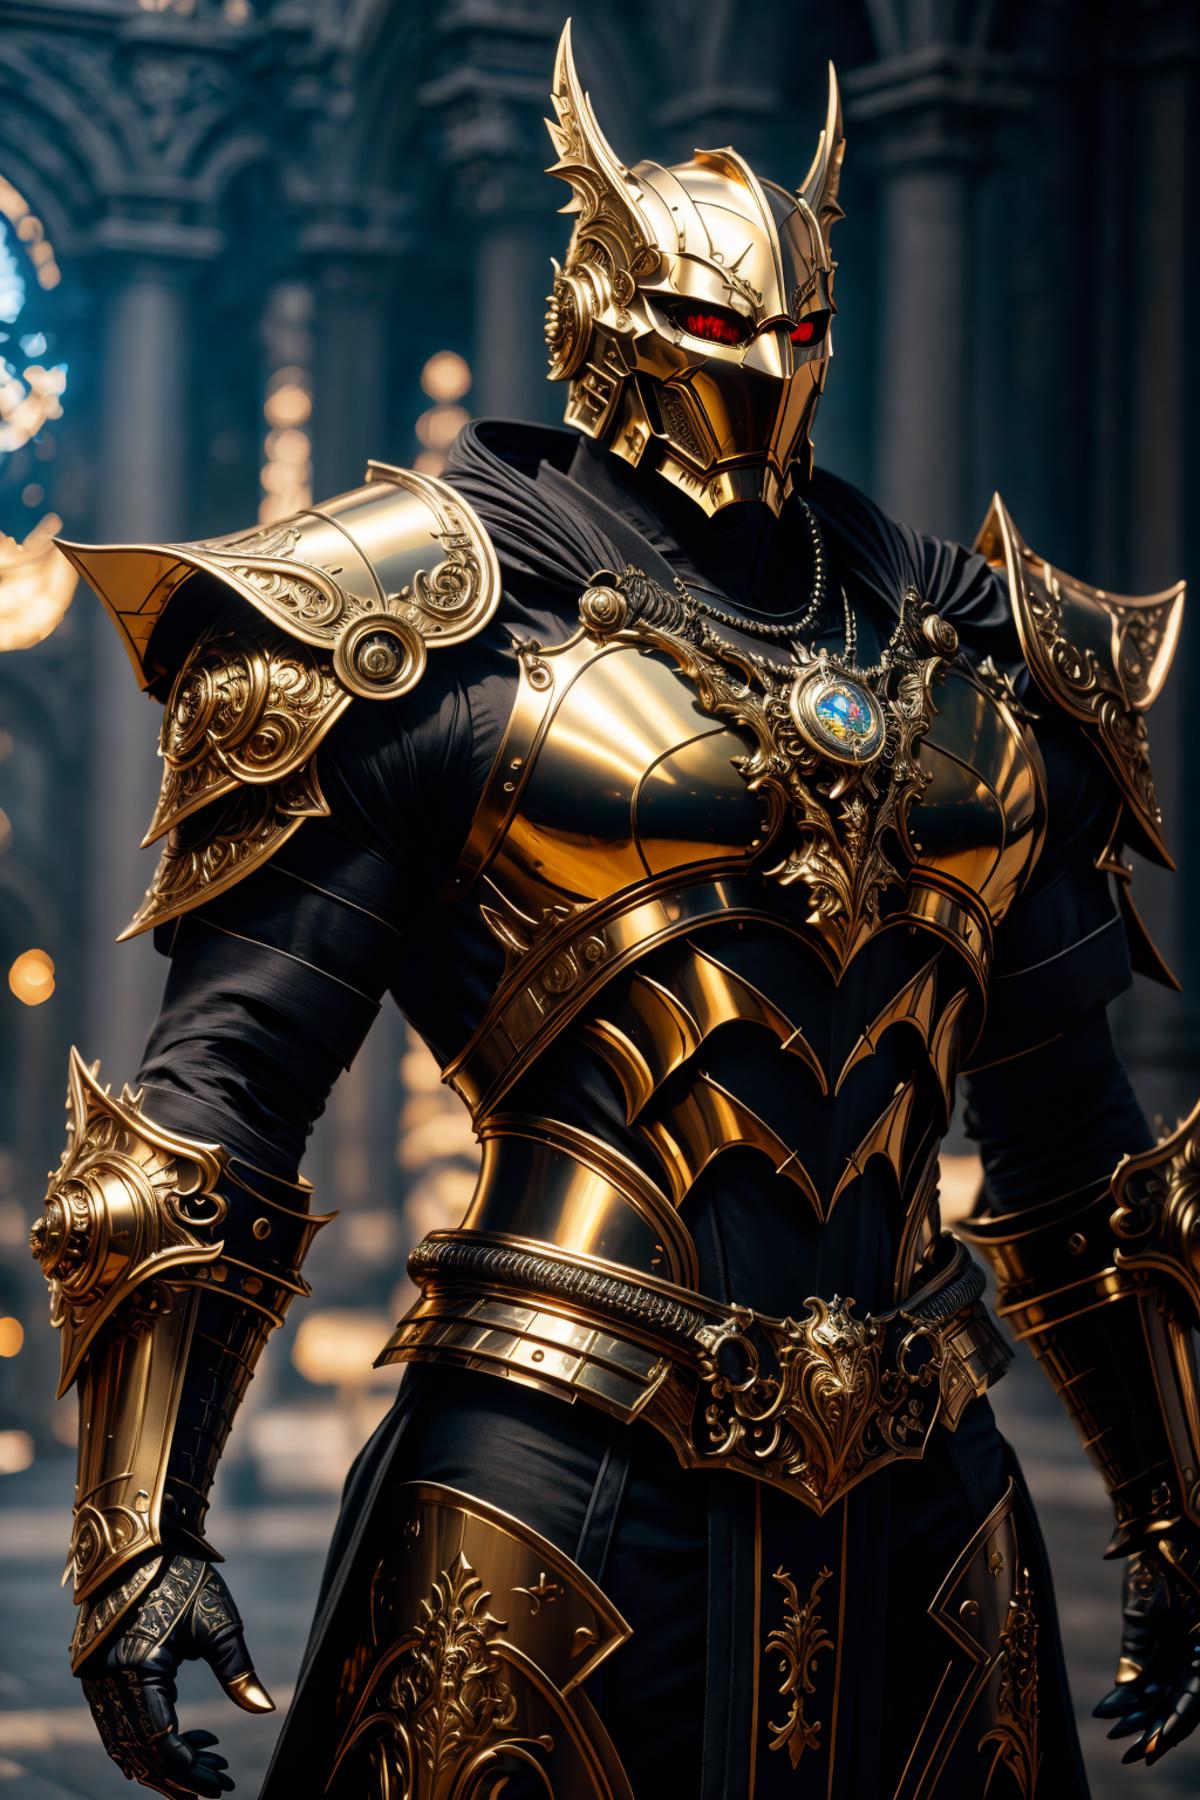 A golden armor suit with a sword on the right arm.